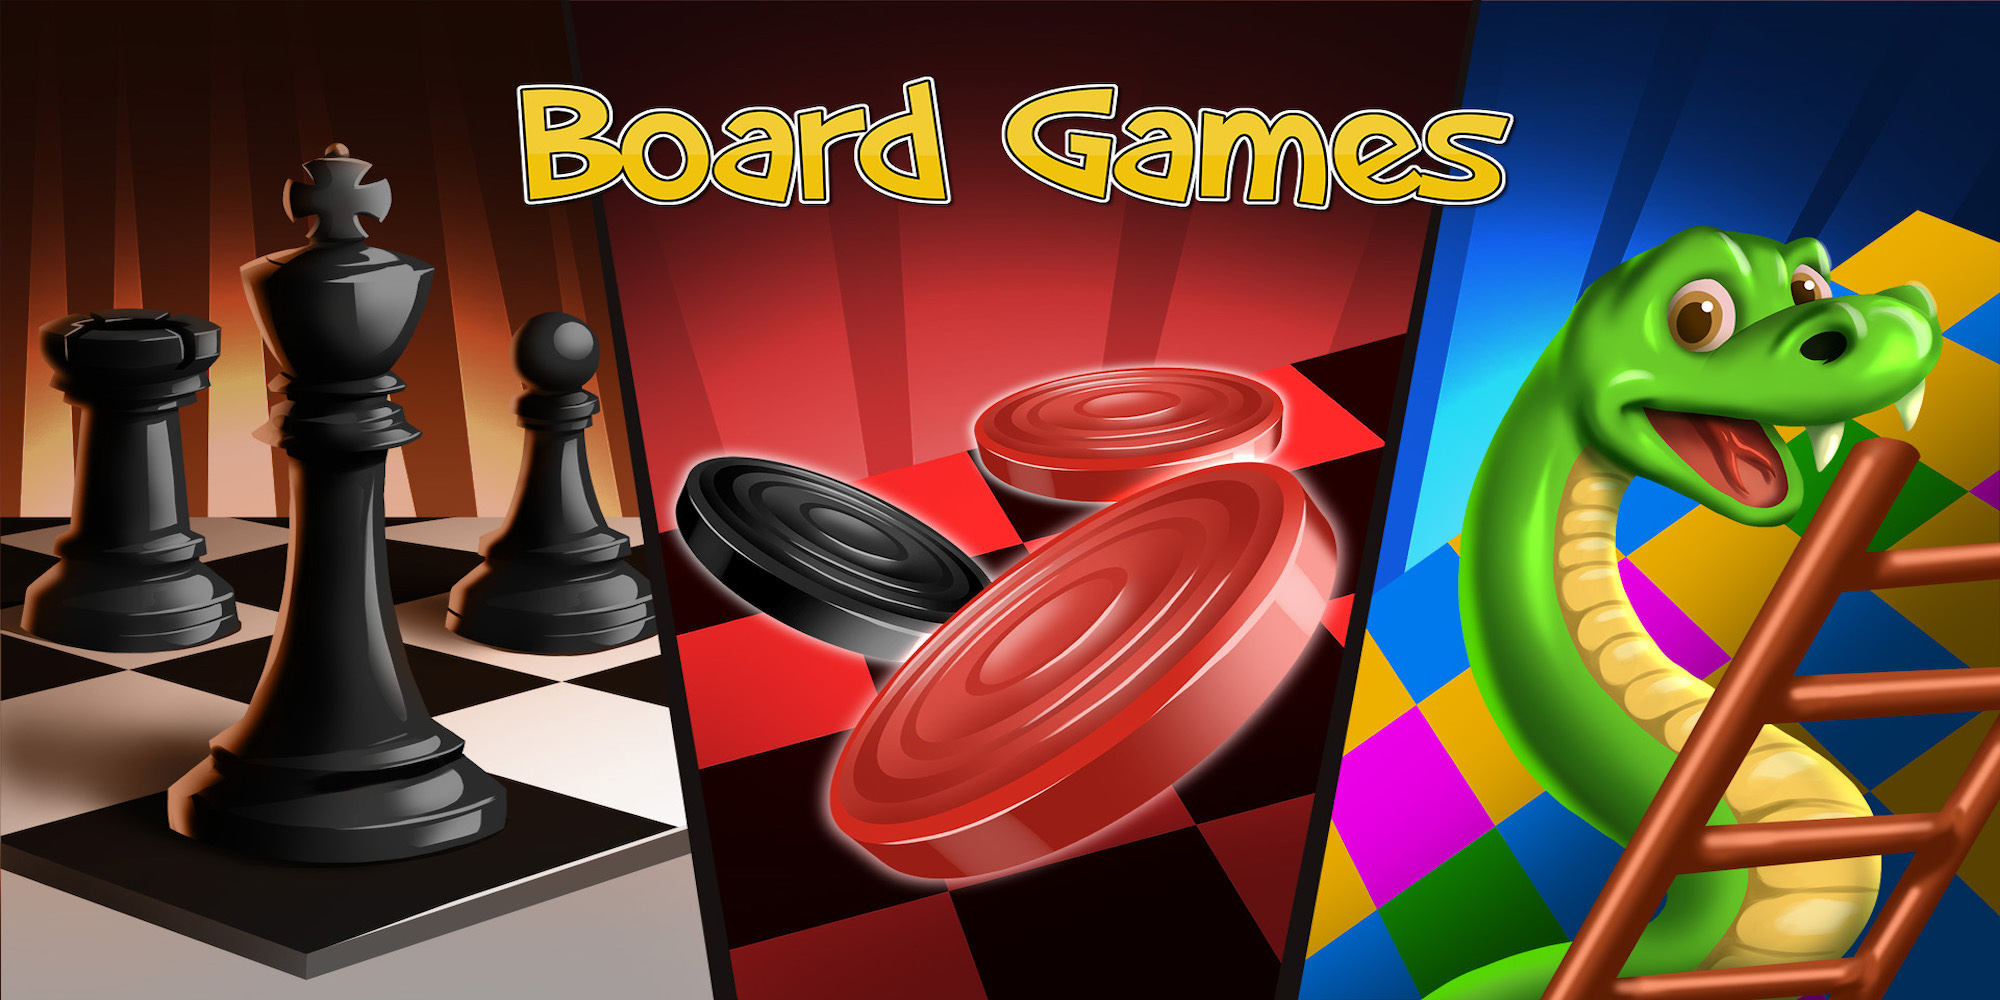 Board Games, Nintendo Switch download software, Games